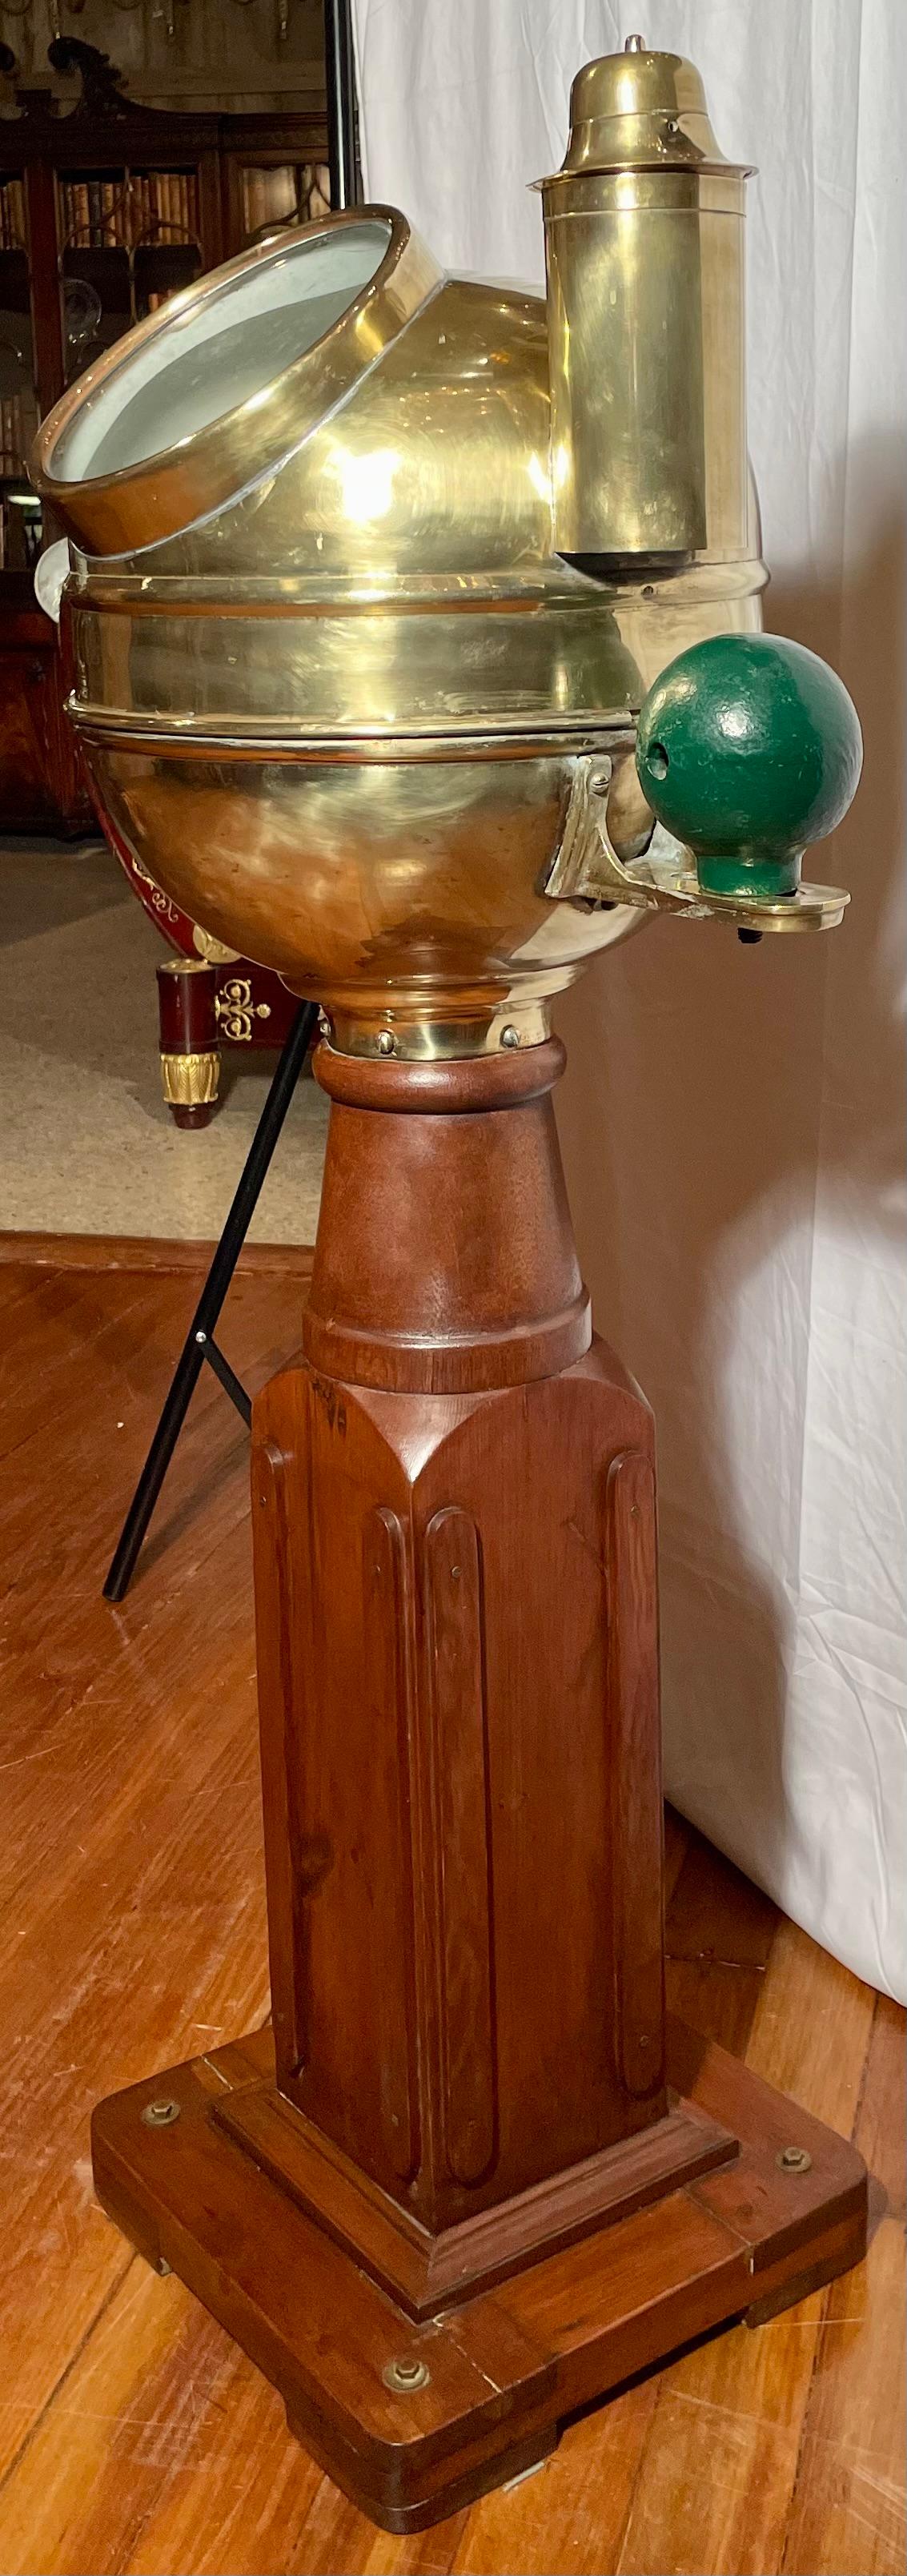 Copper & Brass Ship's Binnacle with Compass & Lantern, circa 1940s-1950s In Good Condition For Sale In New Orleans, LA